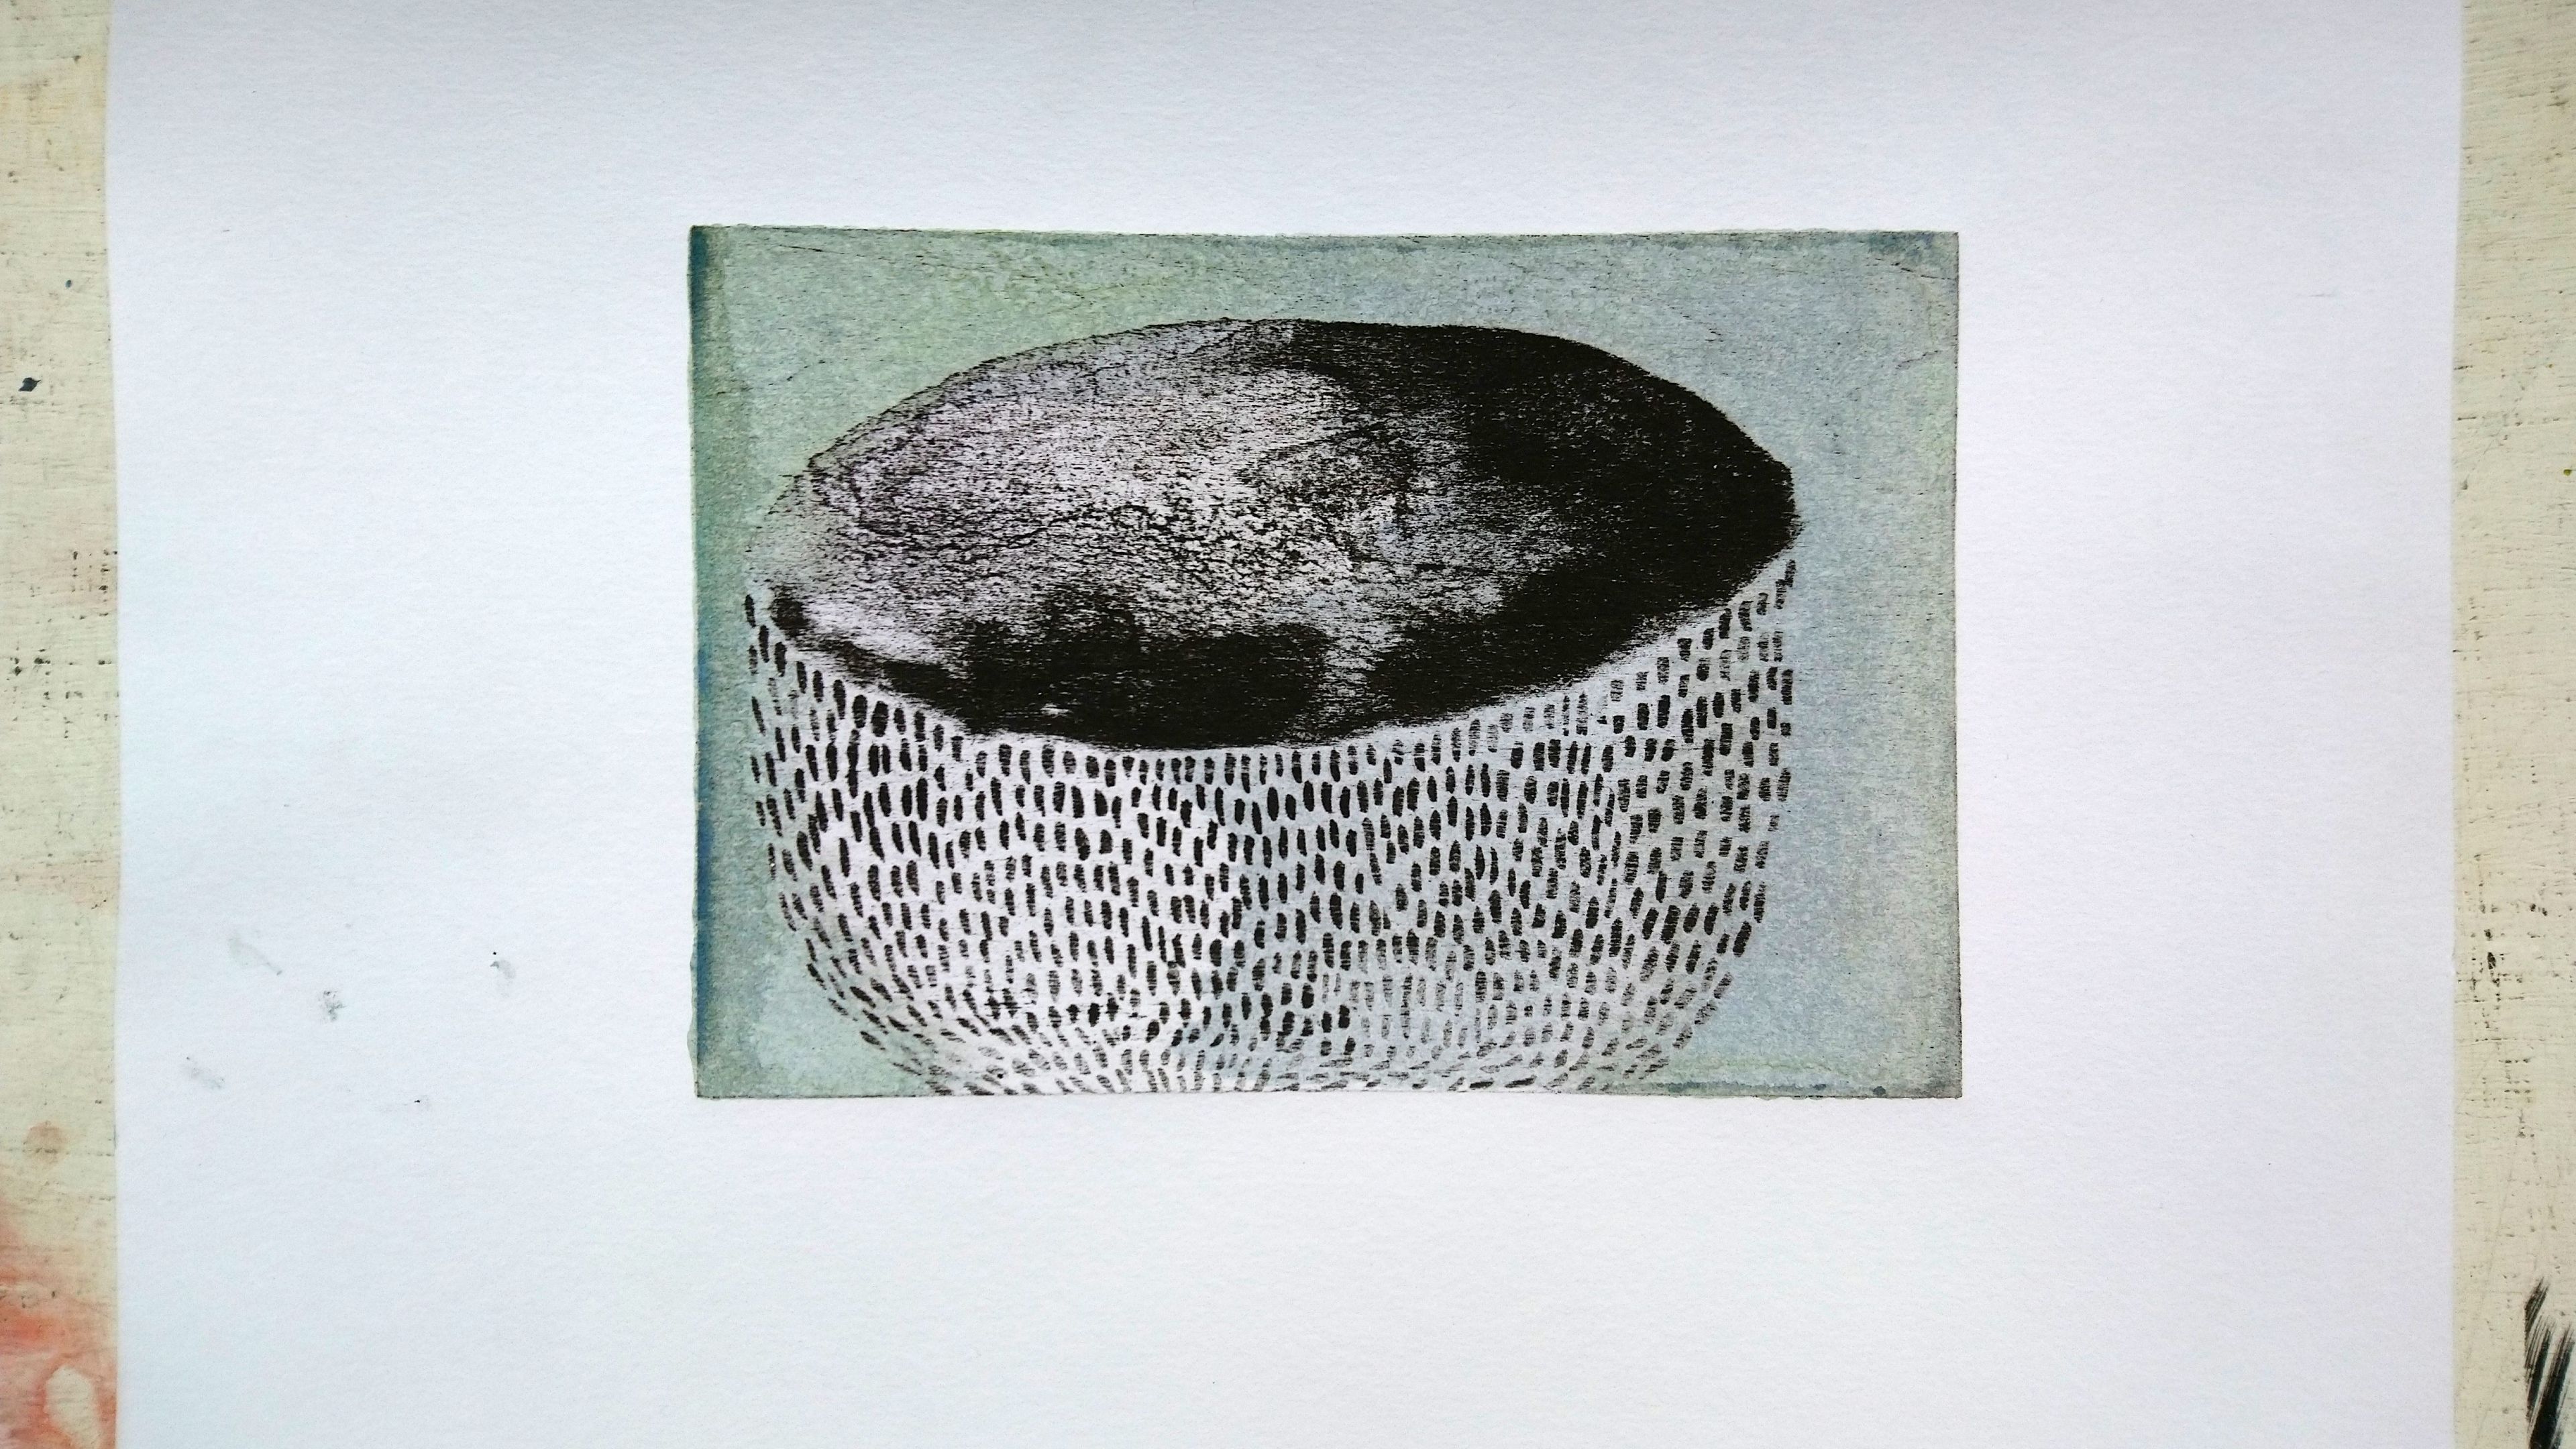 lithography print; black and white textured archaeological bowl against muted green background